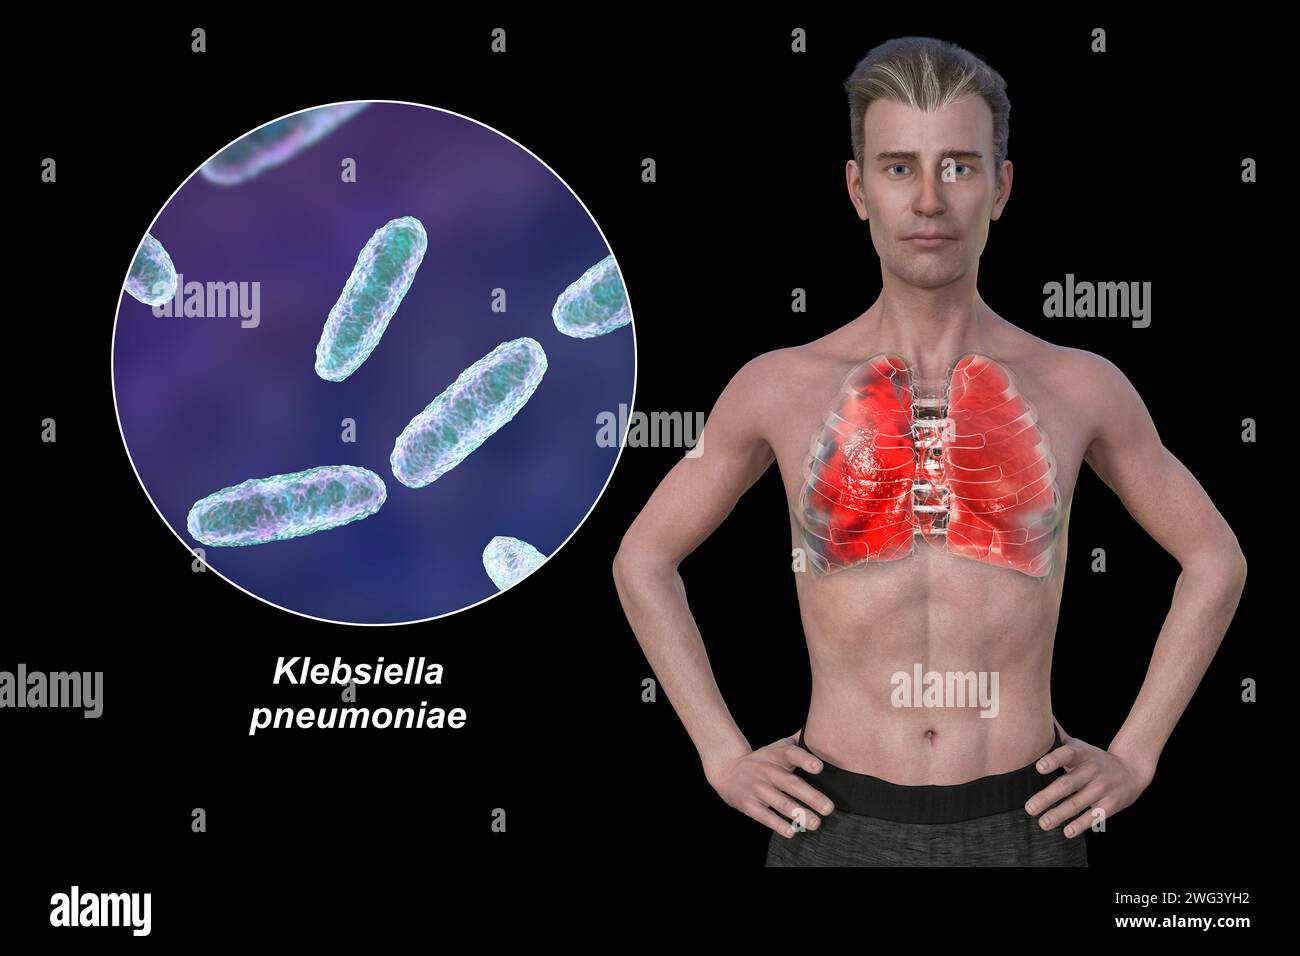 Man with lungs affected by pneumonia, illustration Stock Photo